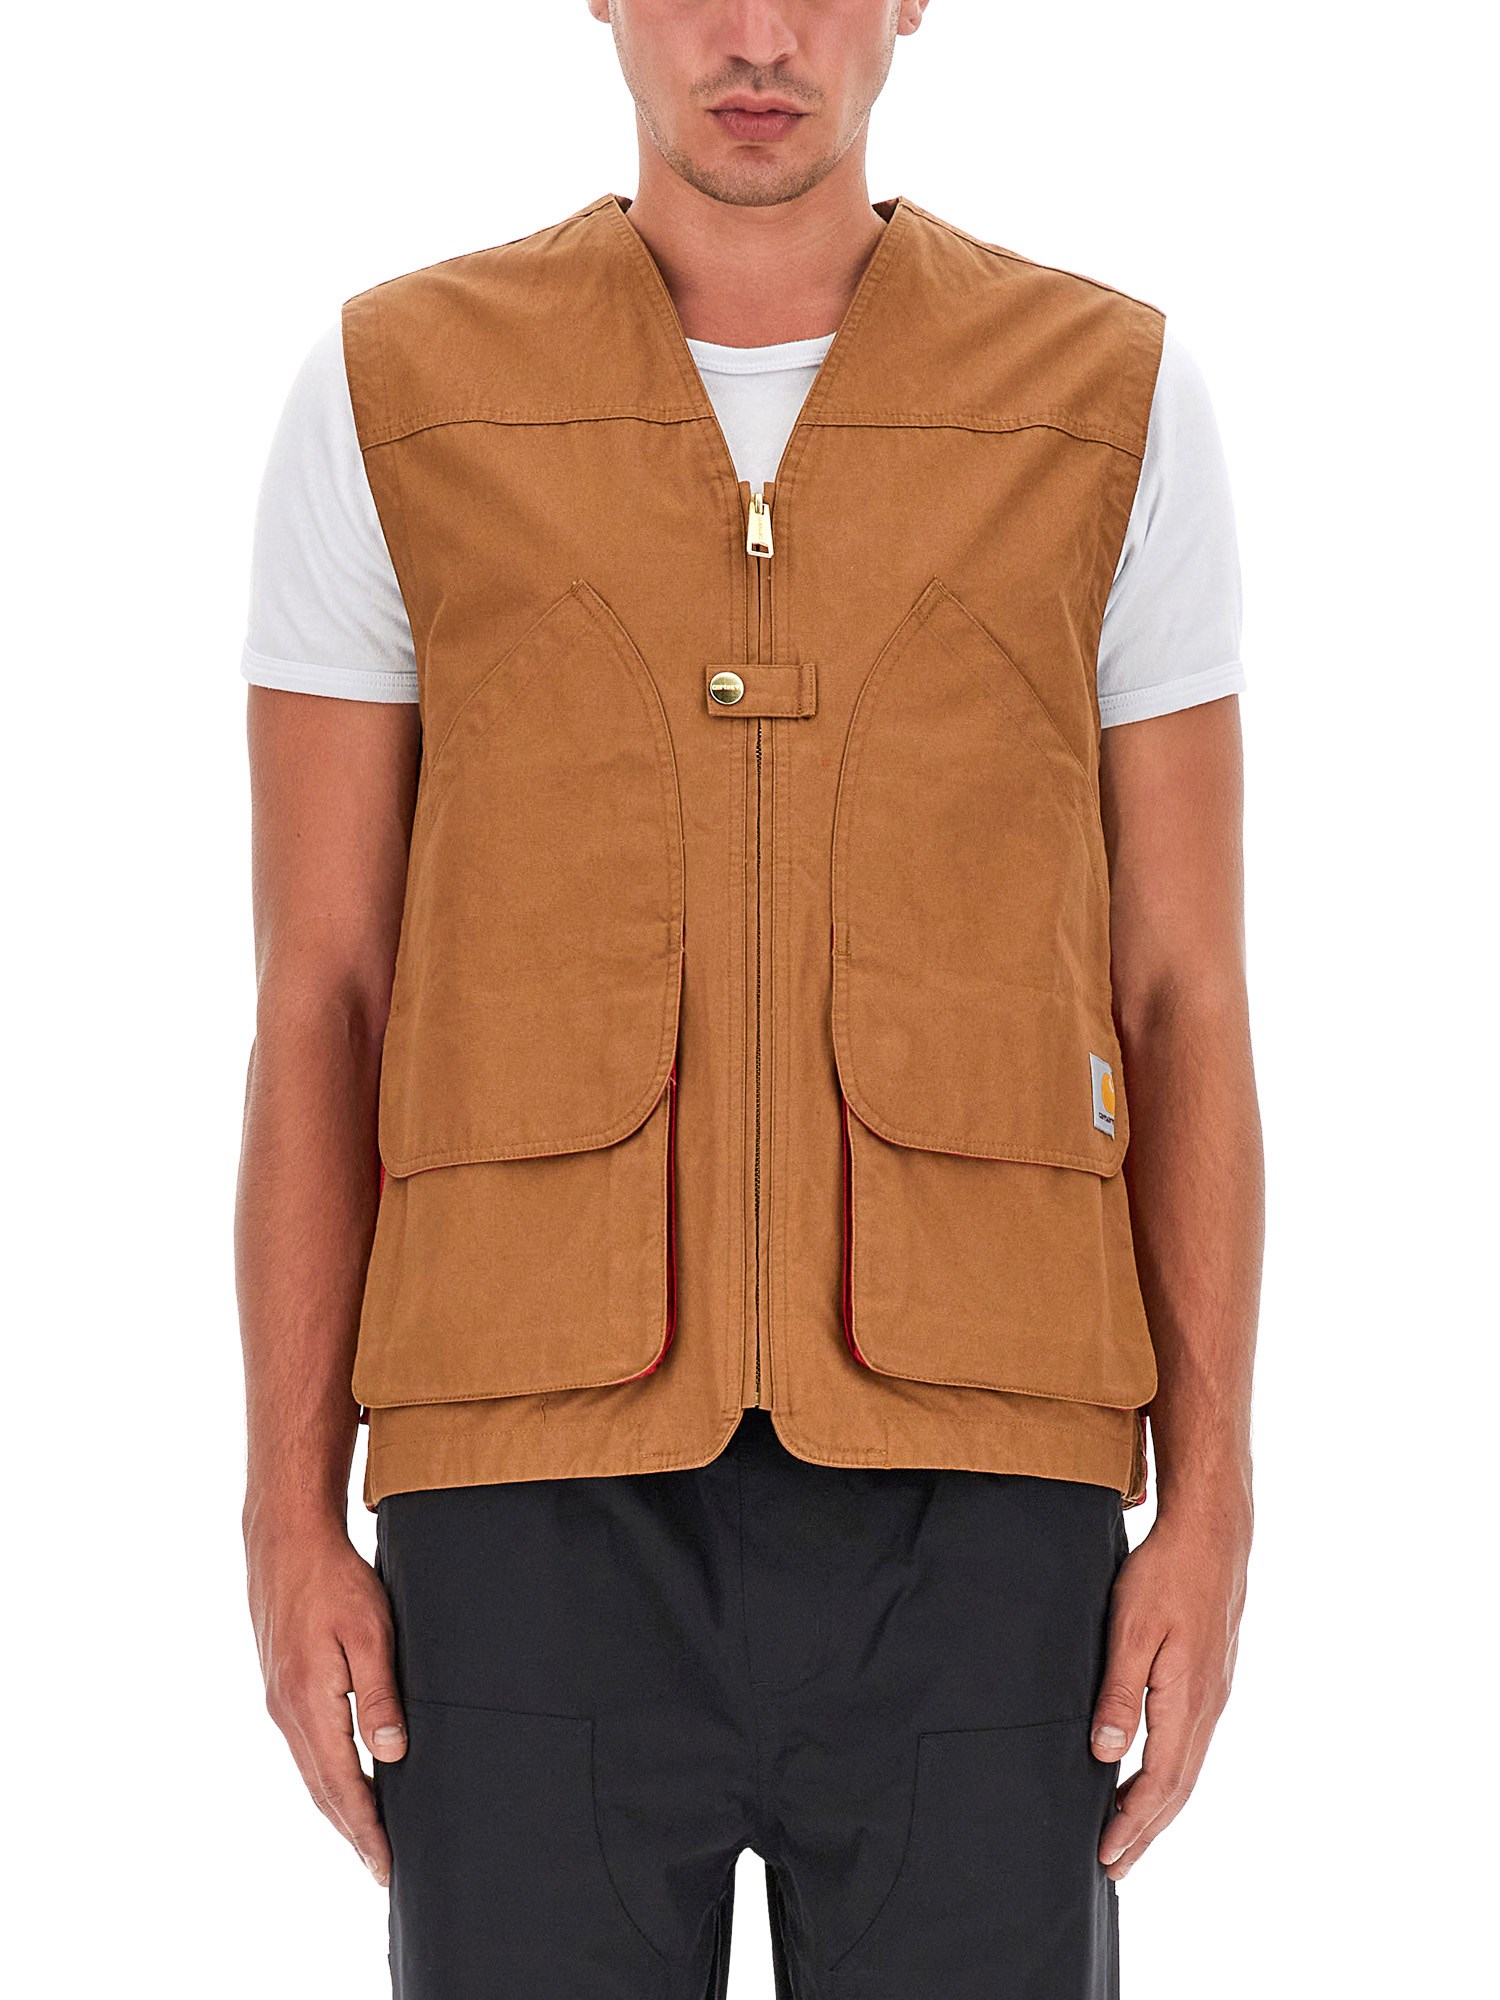 carhartt wip vests with logo